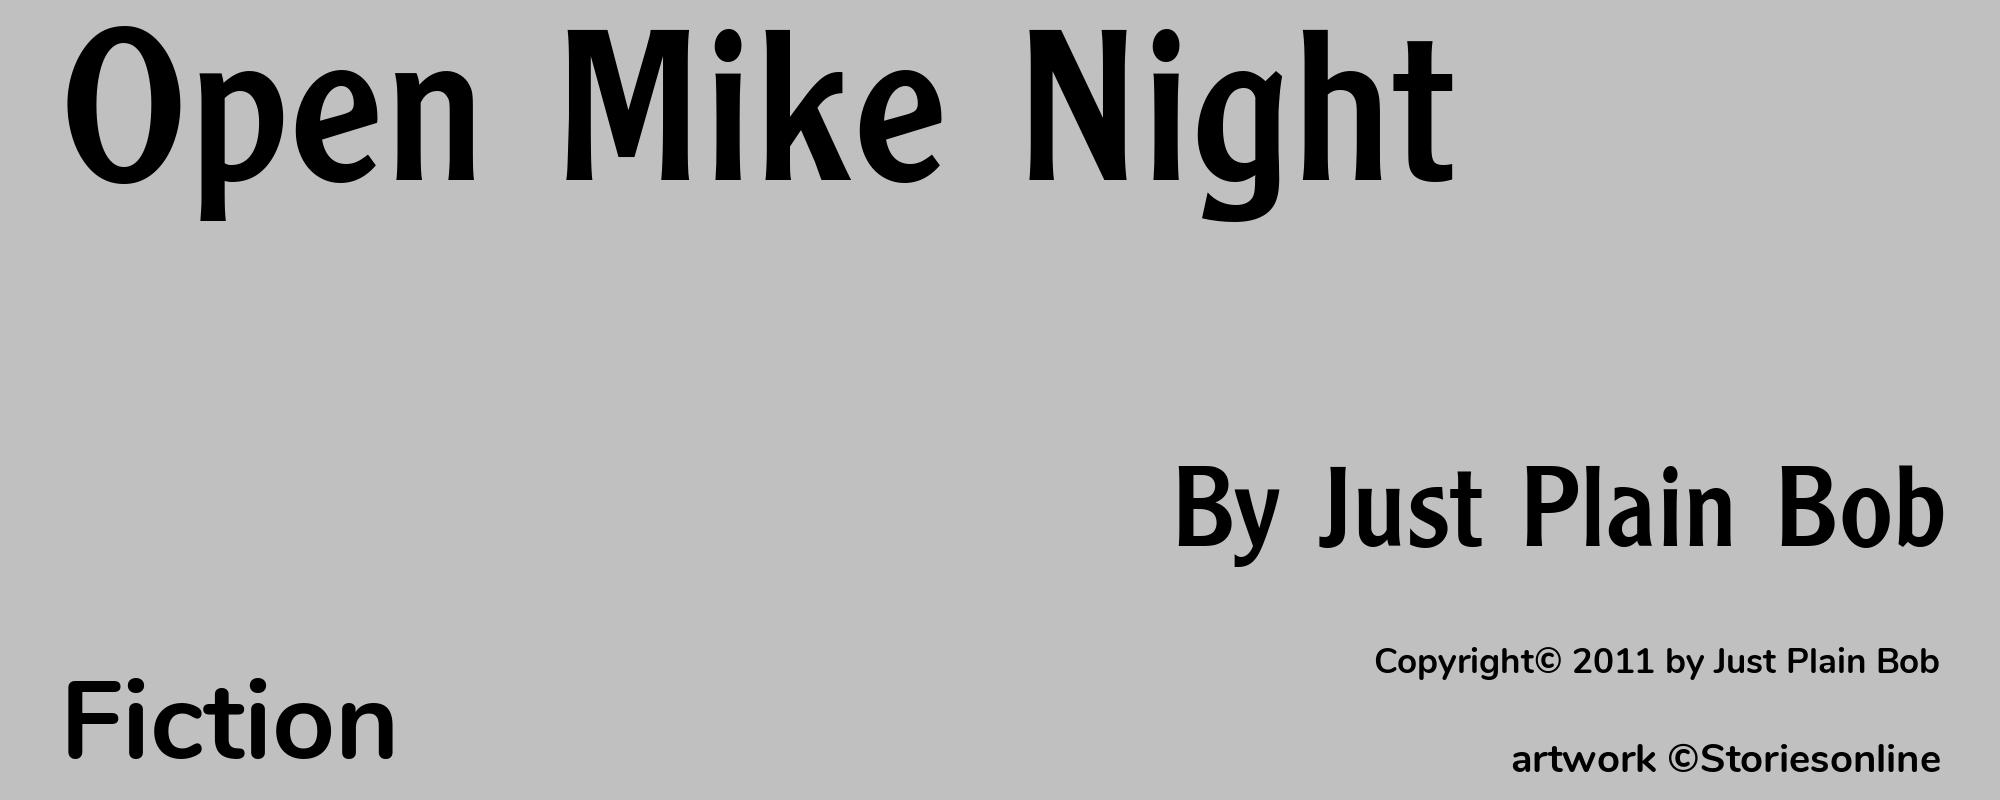 Open Mike Night - Cover